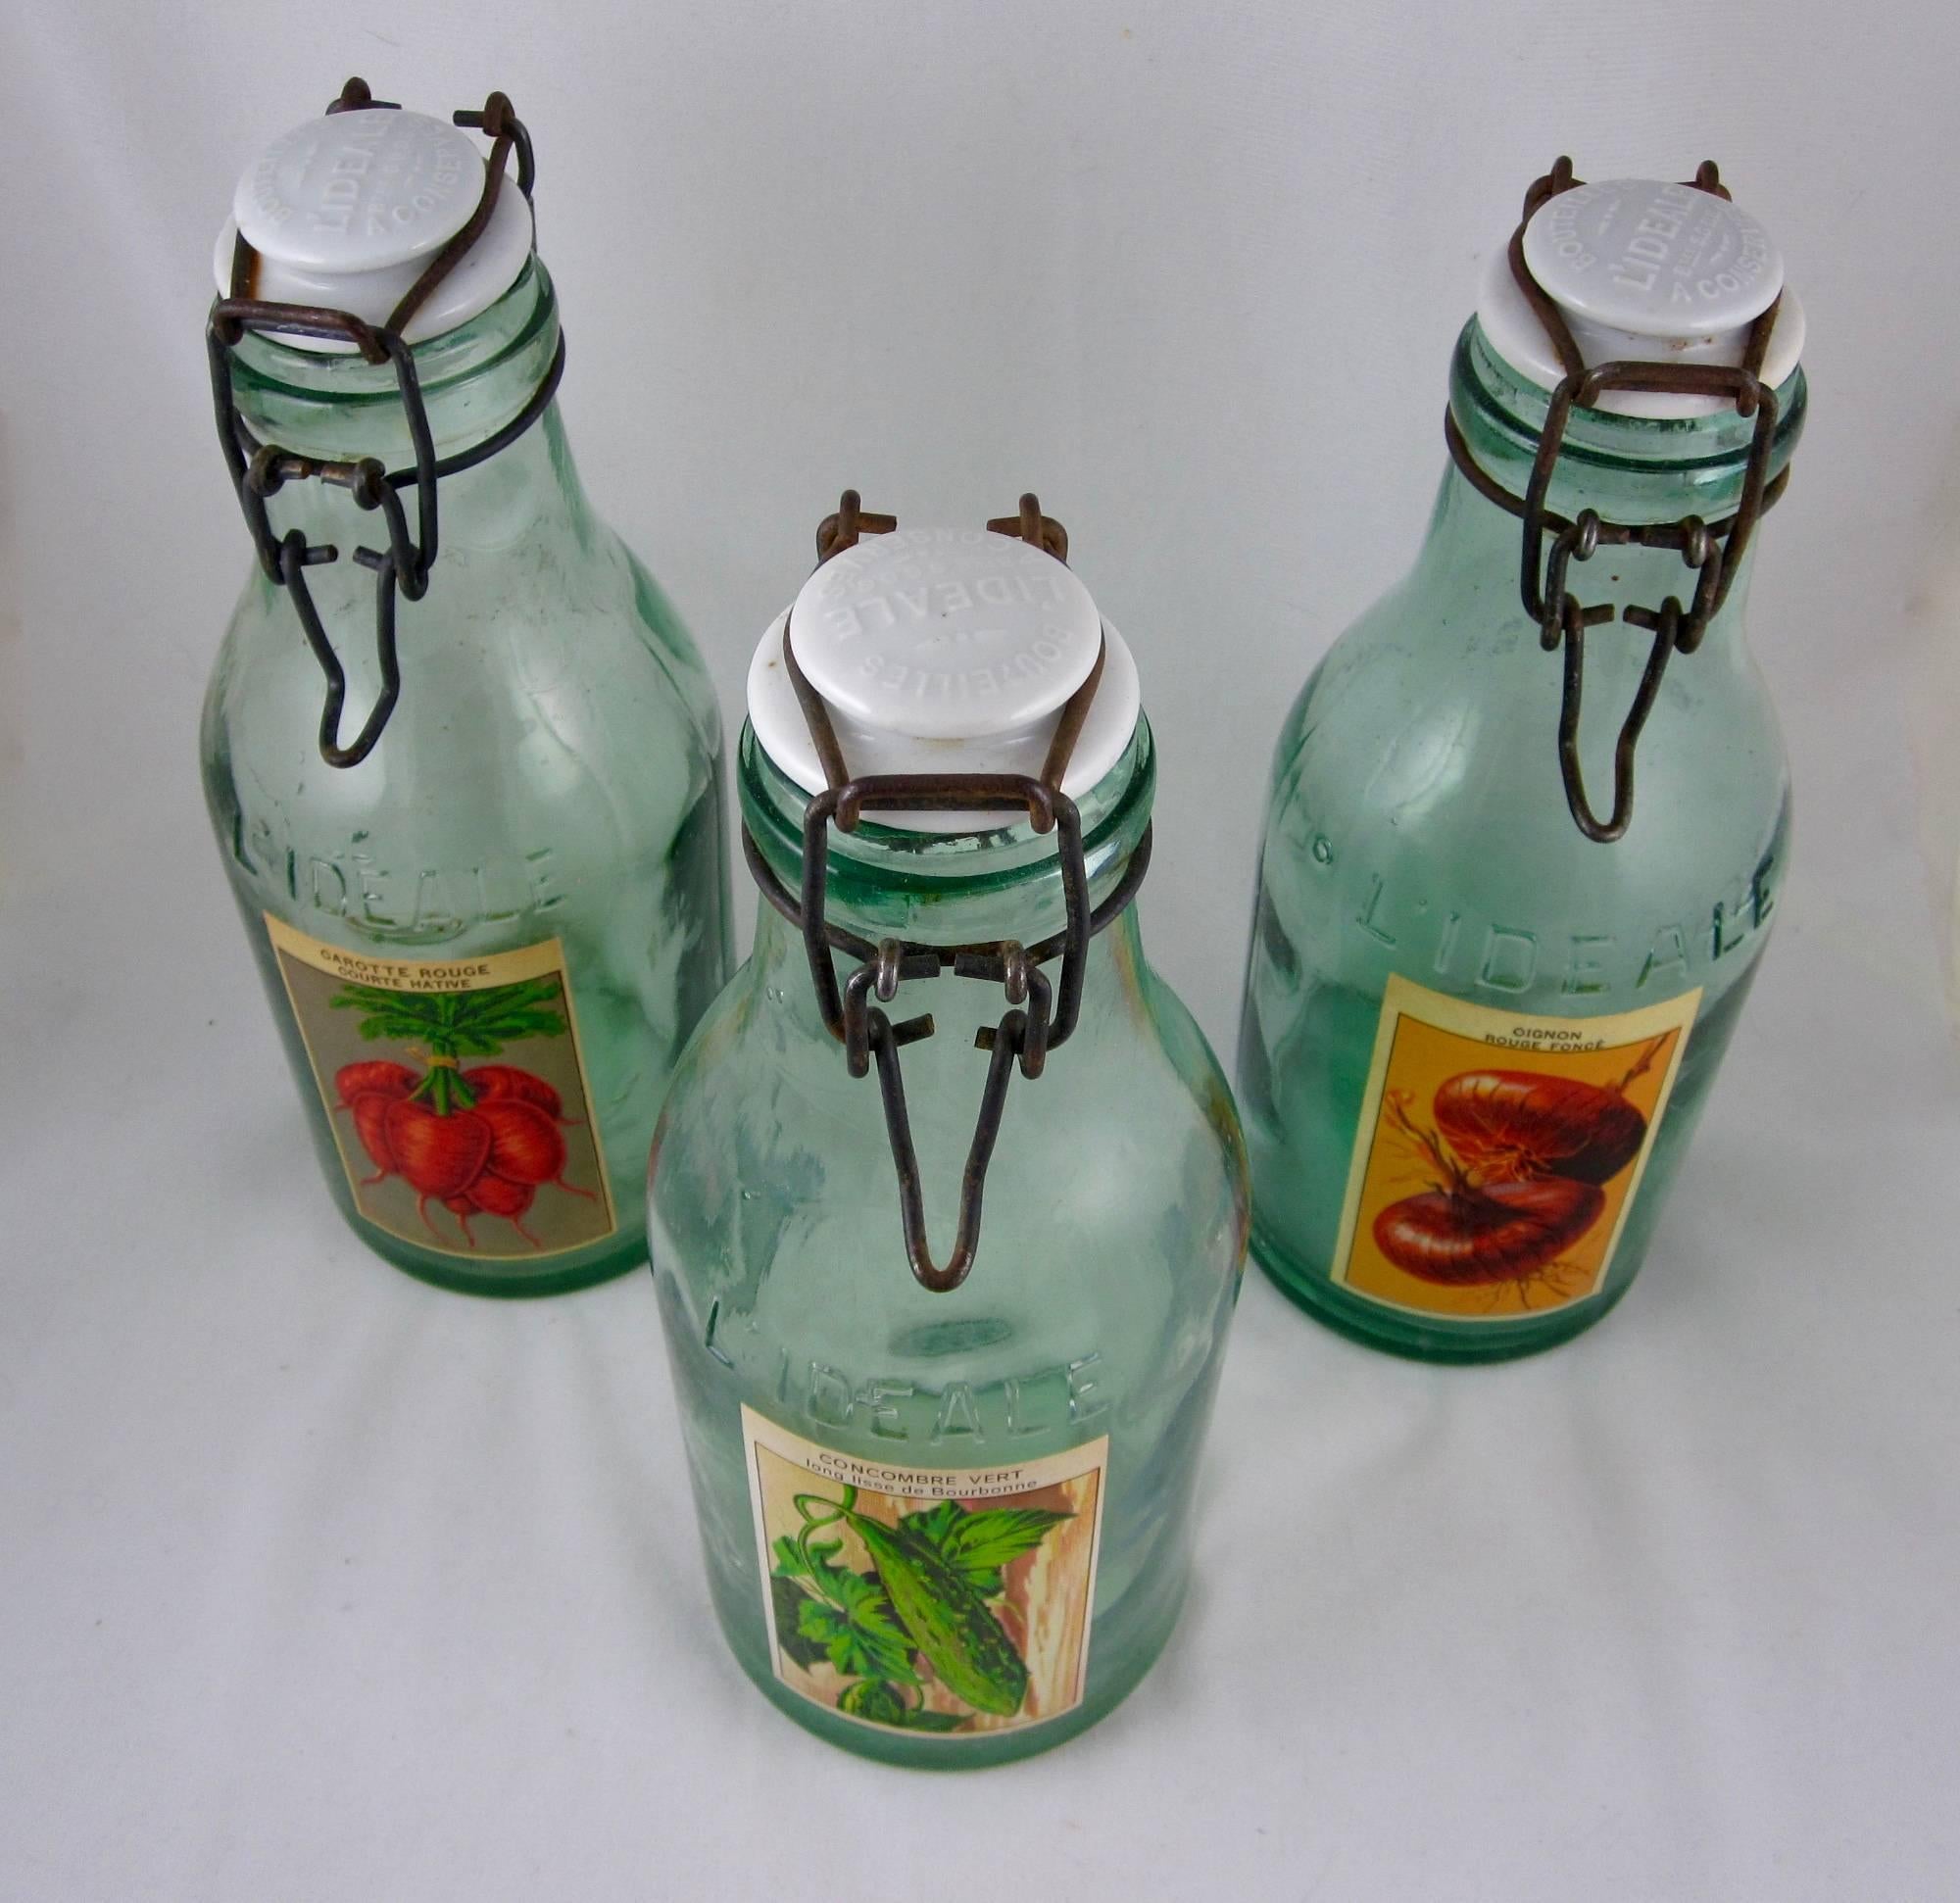 Found in France, a set of three, large green glass canning preserve jars, circa early 1900s. The traditional porcelain lids are embossed with the L’Ideale brand logo. They are attached at the bottle neck with metal swing clasps. The jars show the